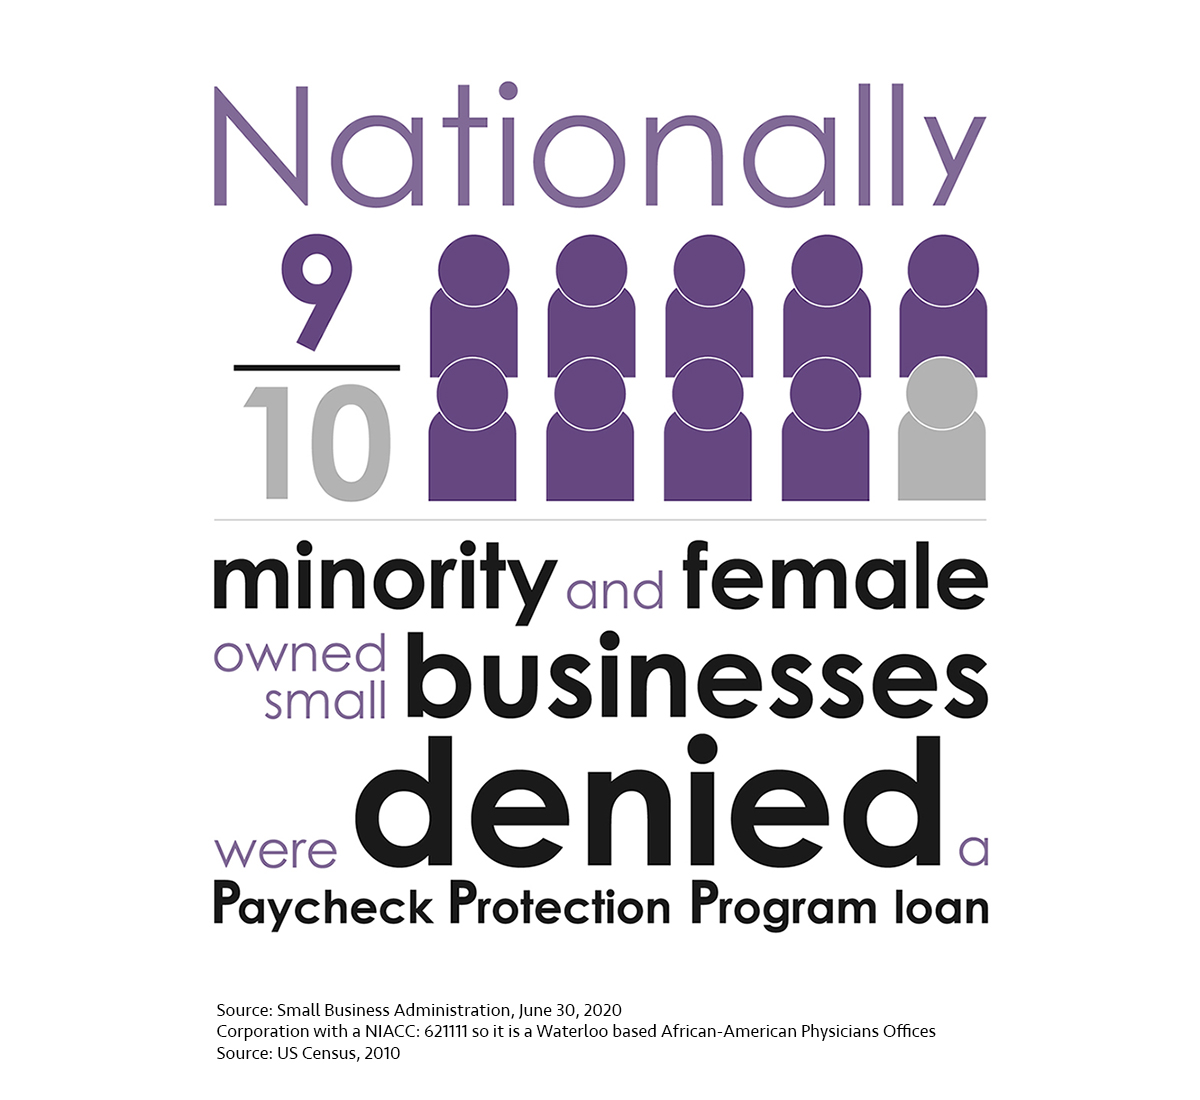 Nationally 9/10 minority and female owned small businesses were denied a PPP loan.